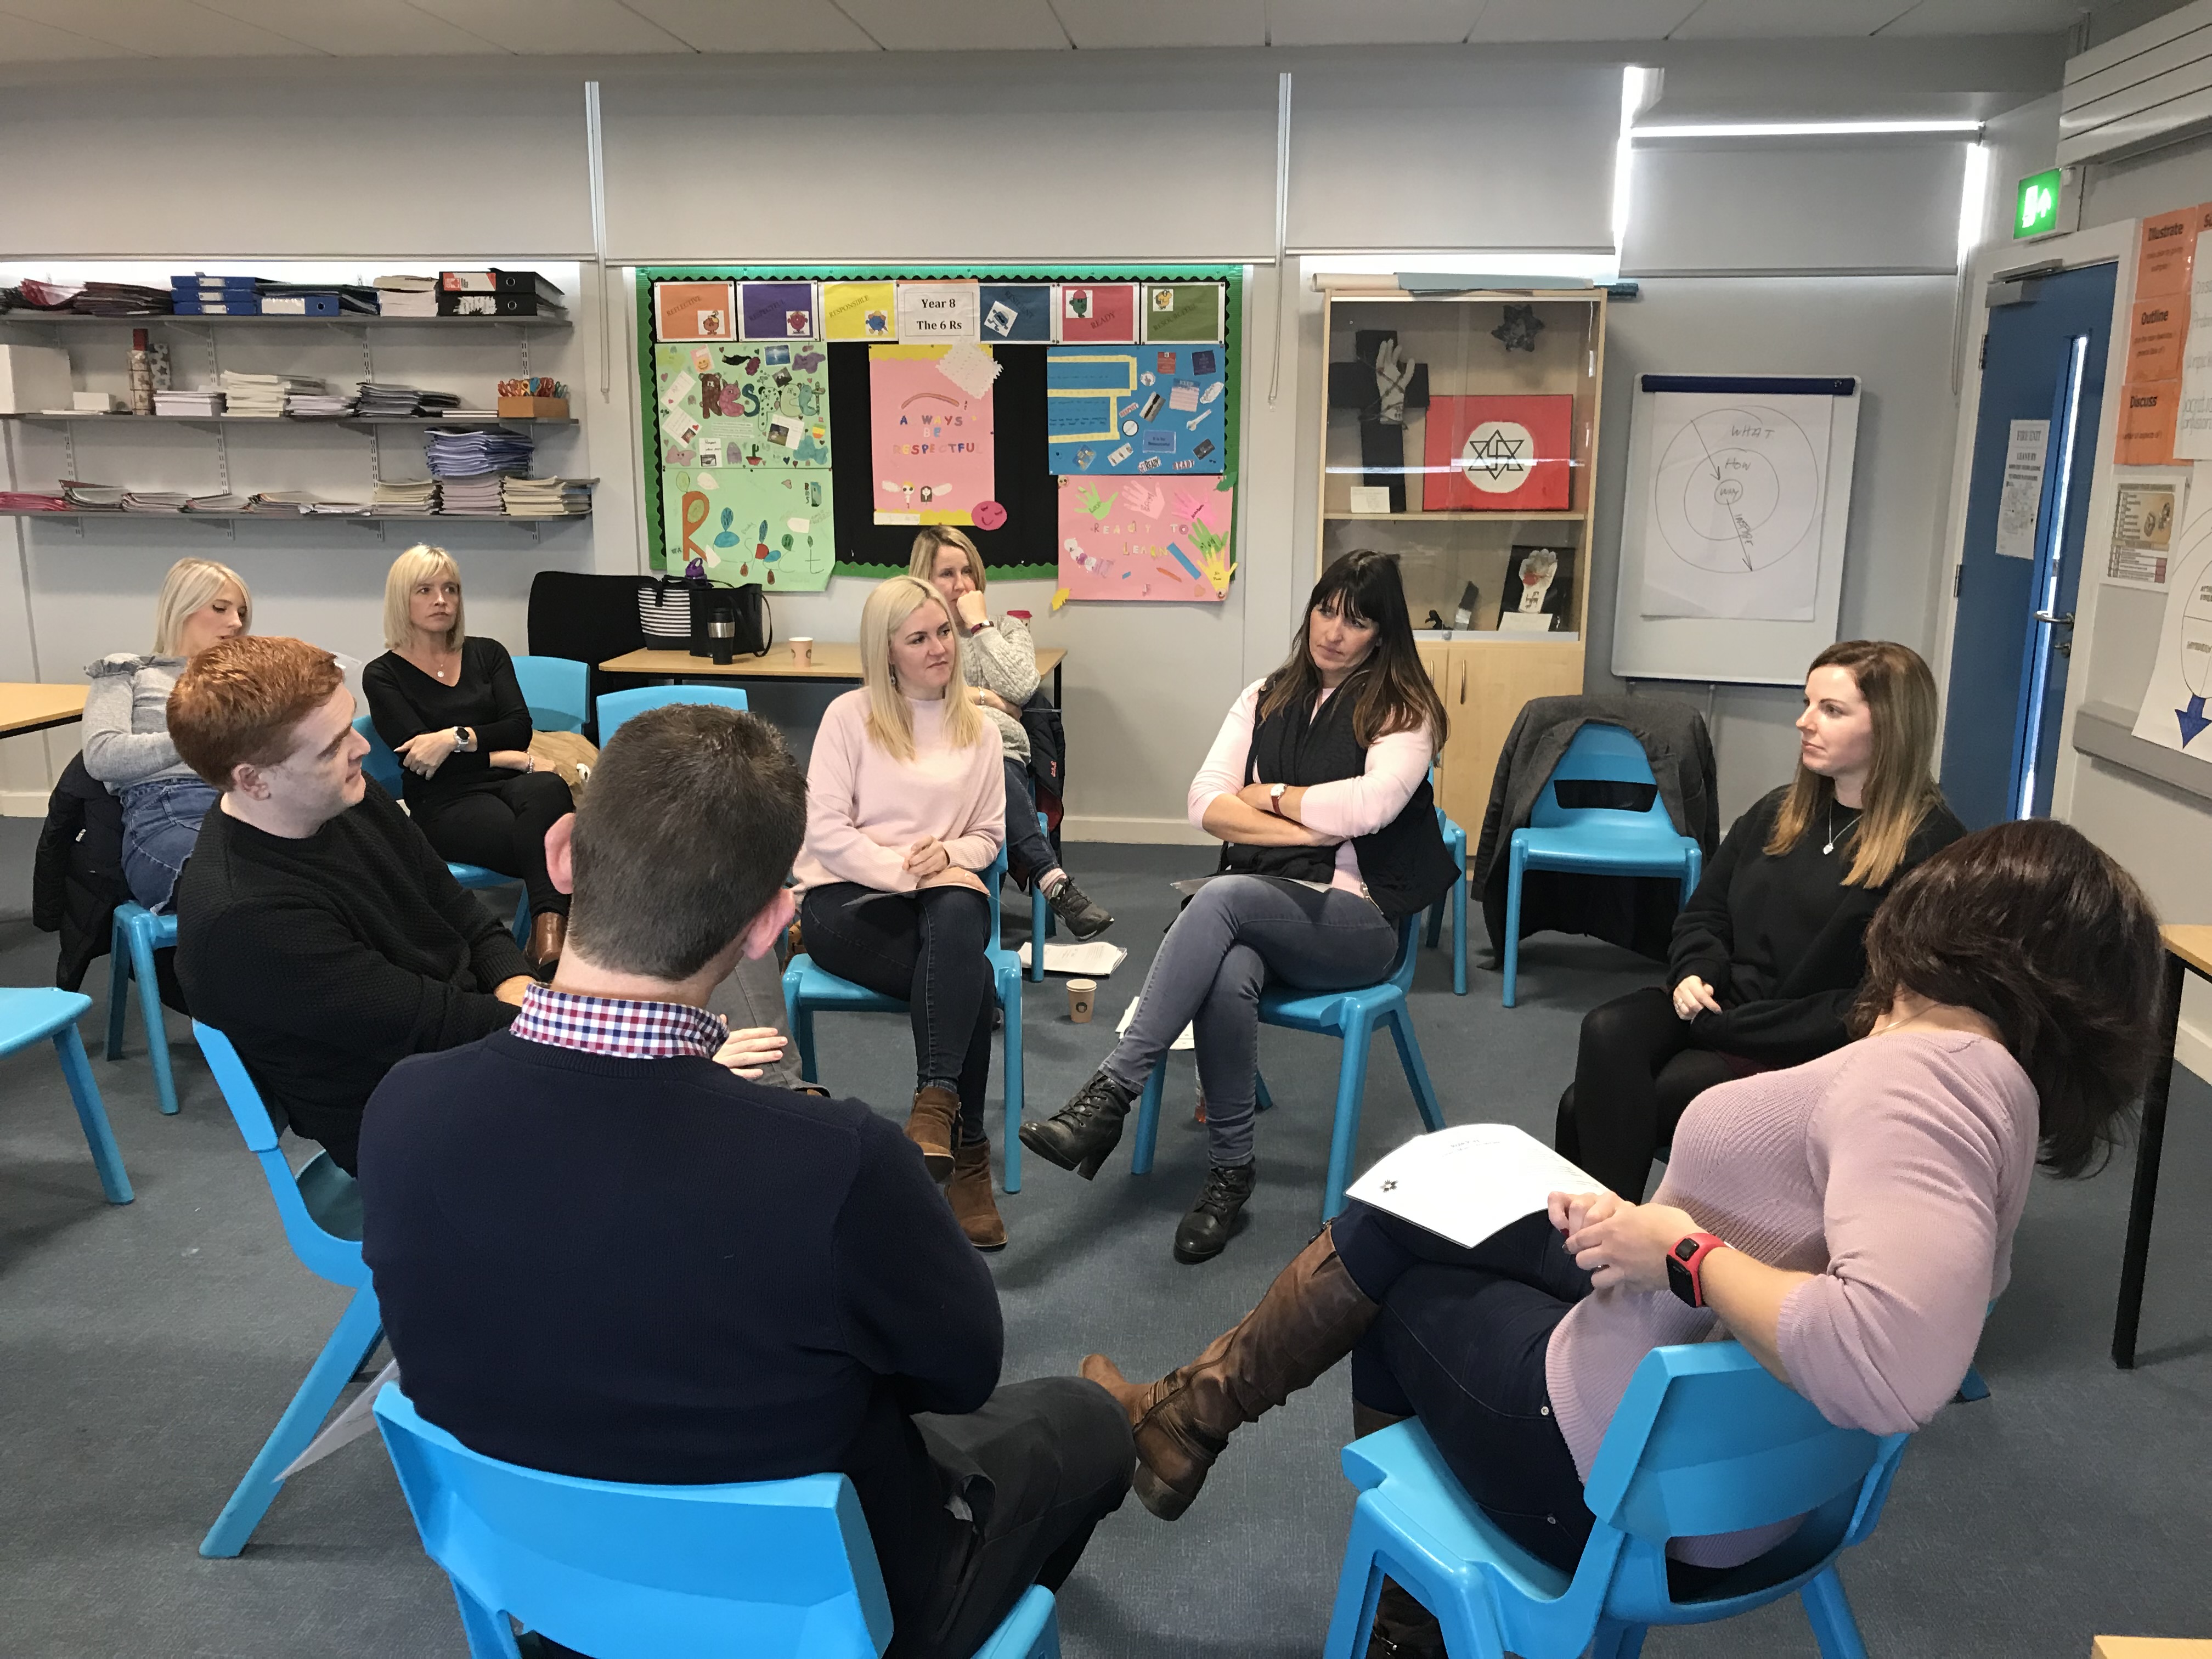 A group of teachers sitting in a circle taking part in a role playing activity as part of a Whole School Training Event